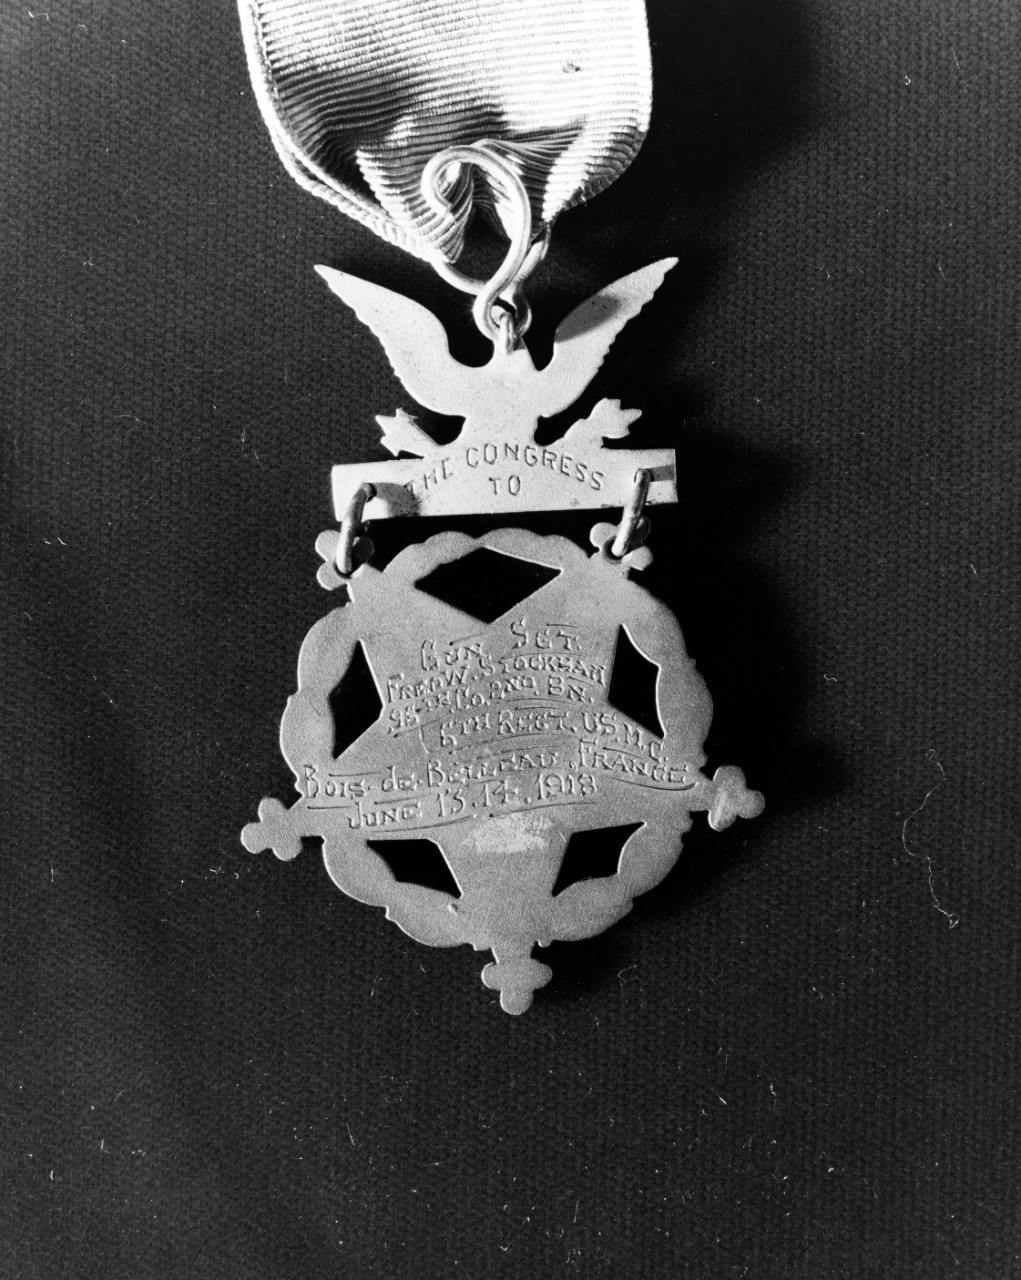 Photo #: NH 82603  The Medal of Honor